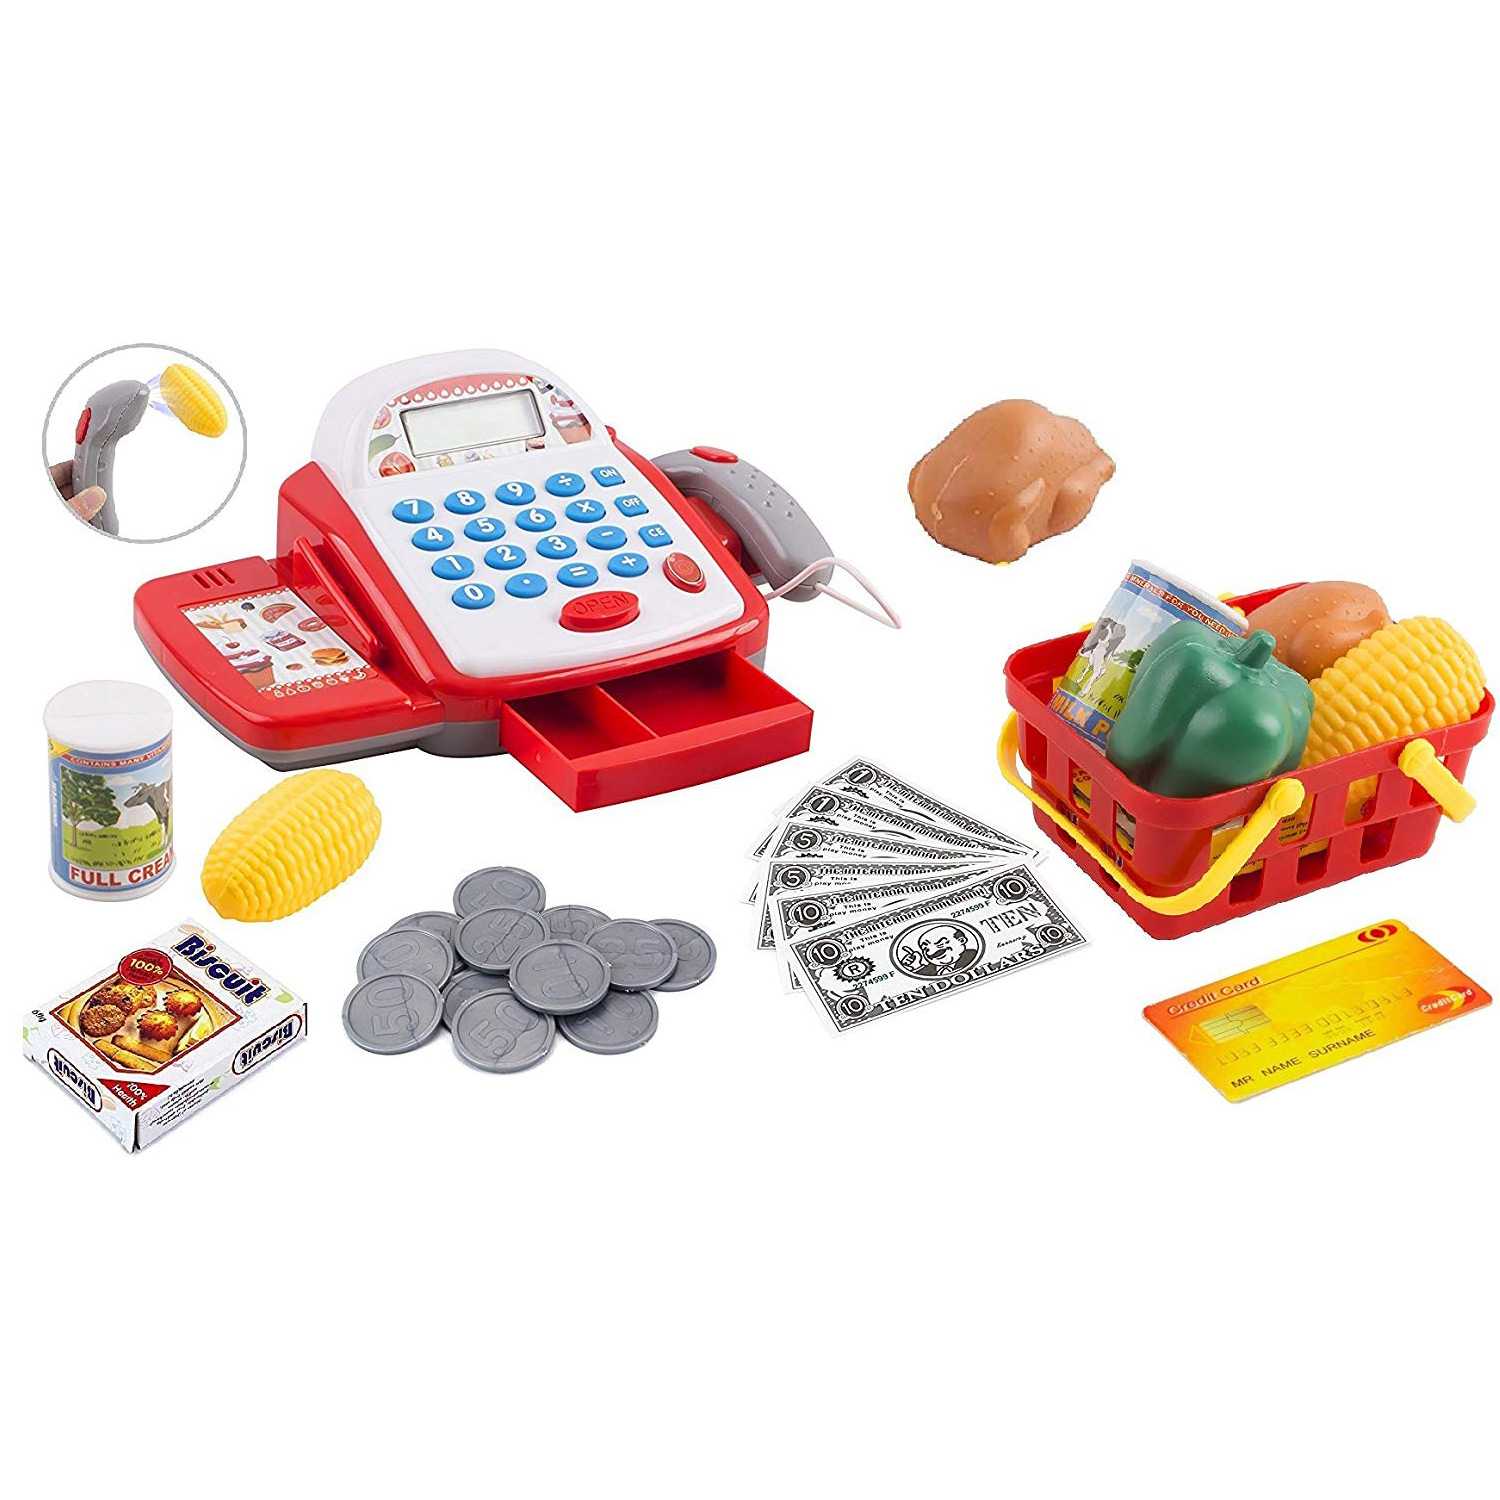 Toy Cash Register Pretend Play Supermarket Cashier Playset Colorful Childrenâ€™s Checkout With Calculator And Sounds Educational Learning Toys For Kids Toddlers And Preschool (White/Red)